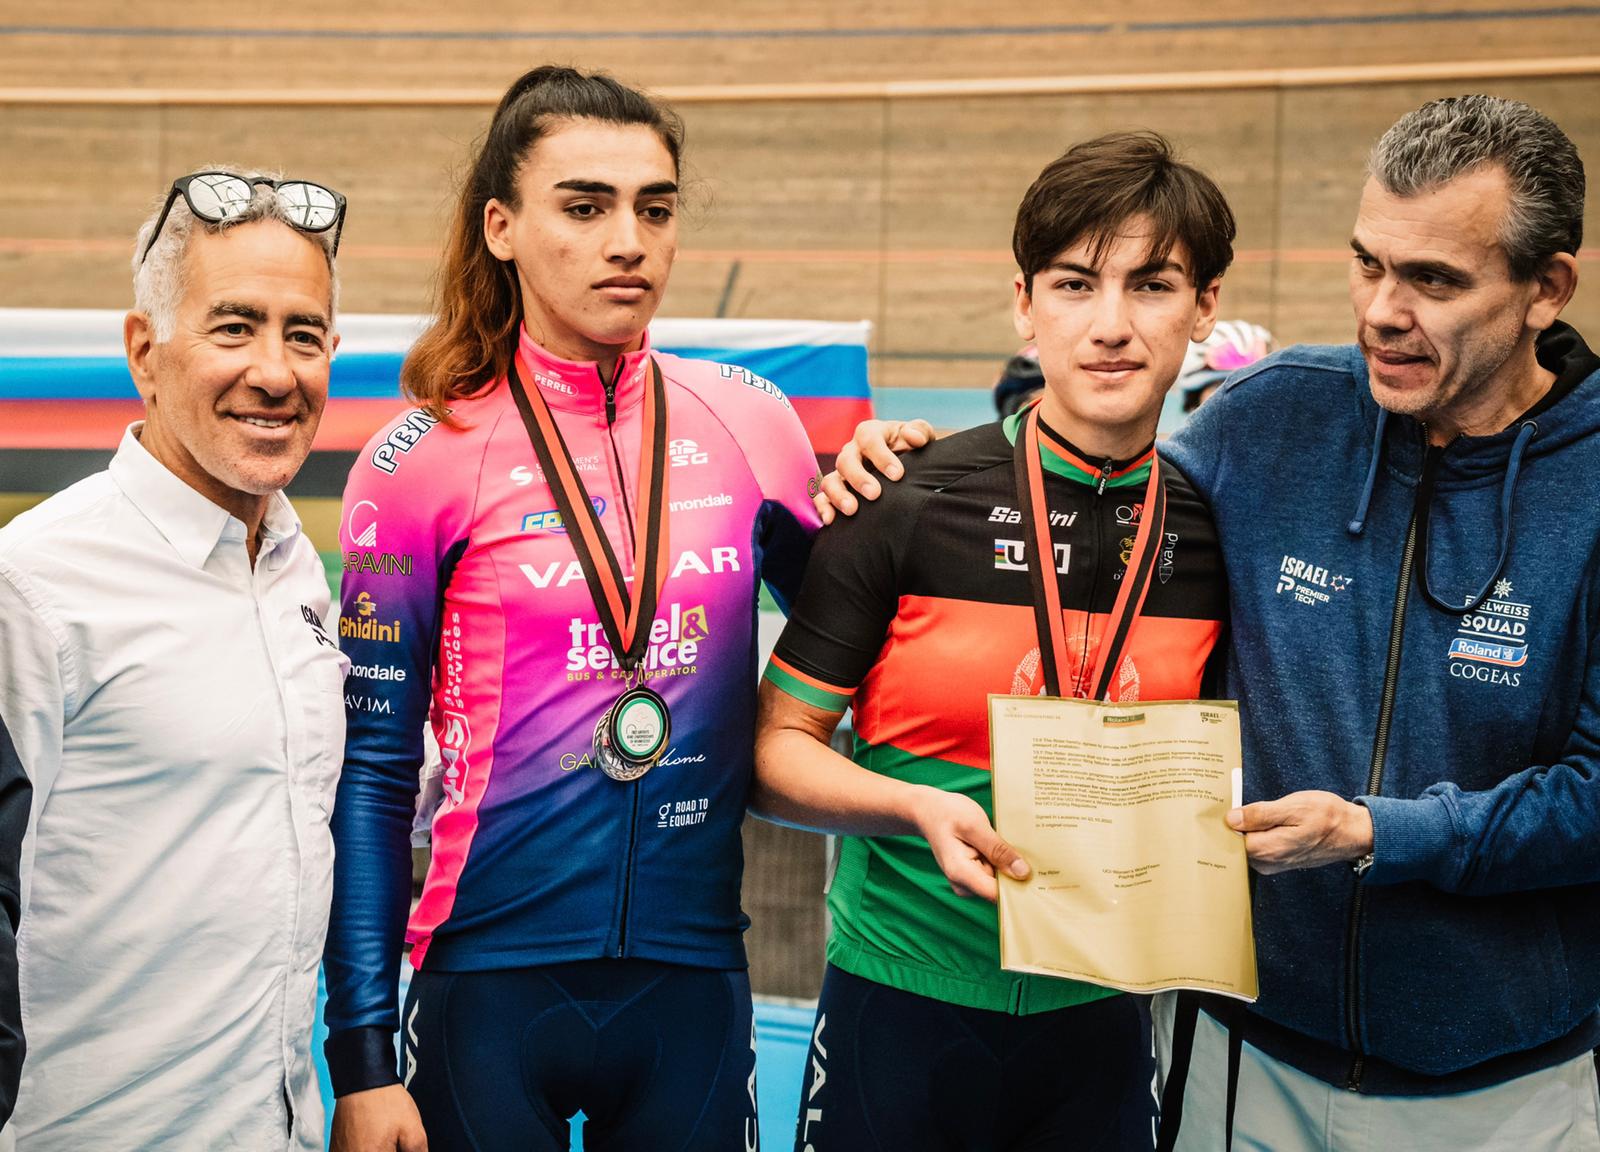 Sylvan Adams, left, congratulating Zarifa Hussaini, contestant in the Afghan national cycling championship held in exile in Switzerland. Photo by Noa Arnon